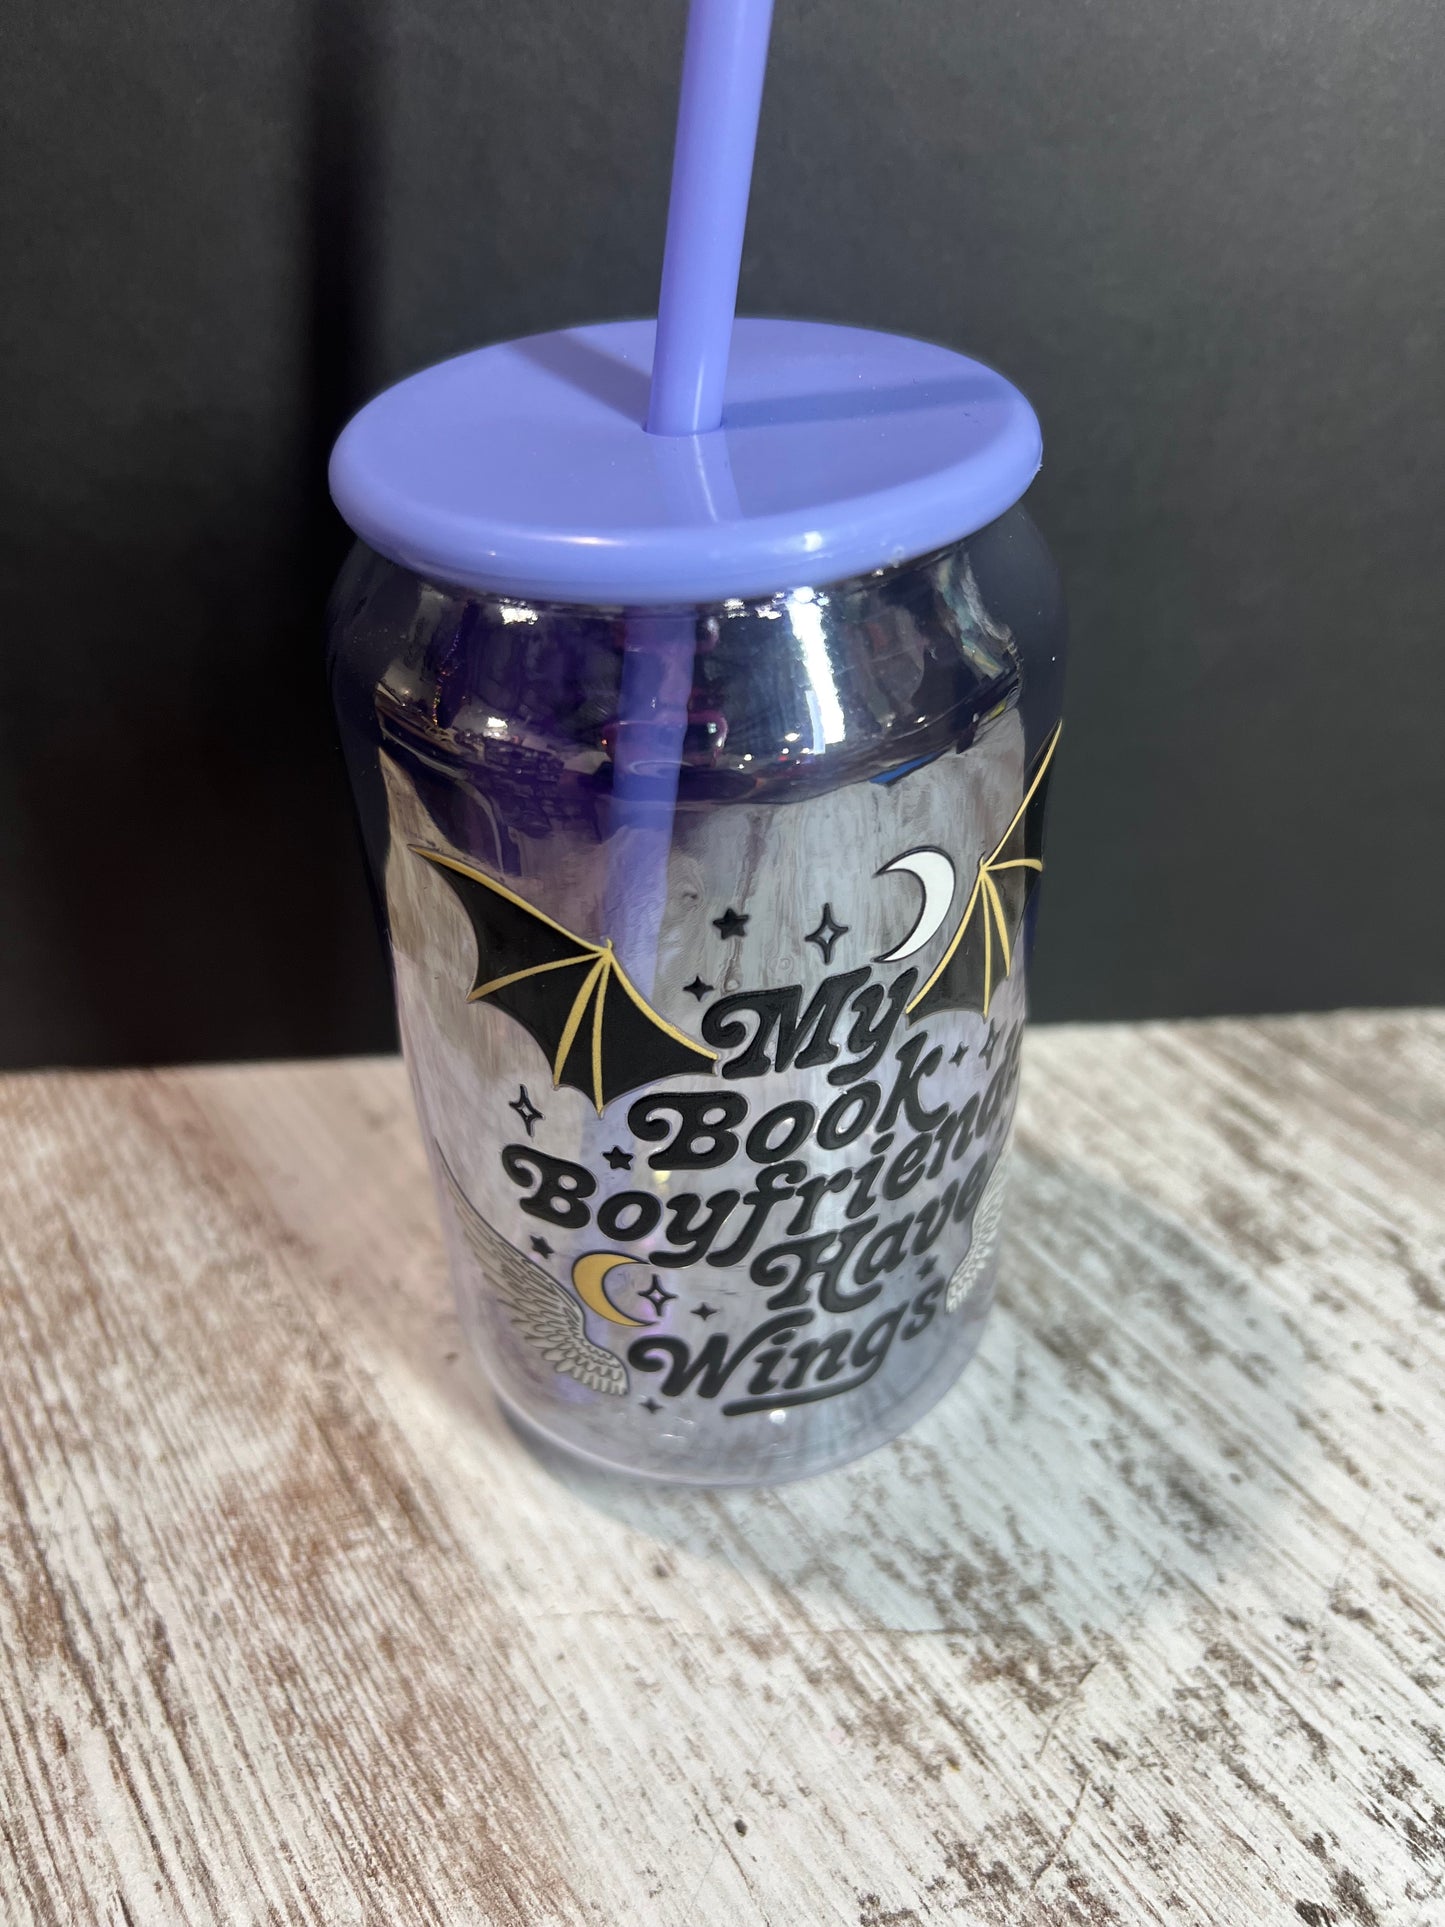 Book Boyfriends Have Wings Glass Tumbler